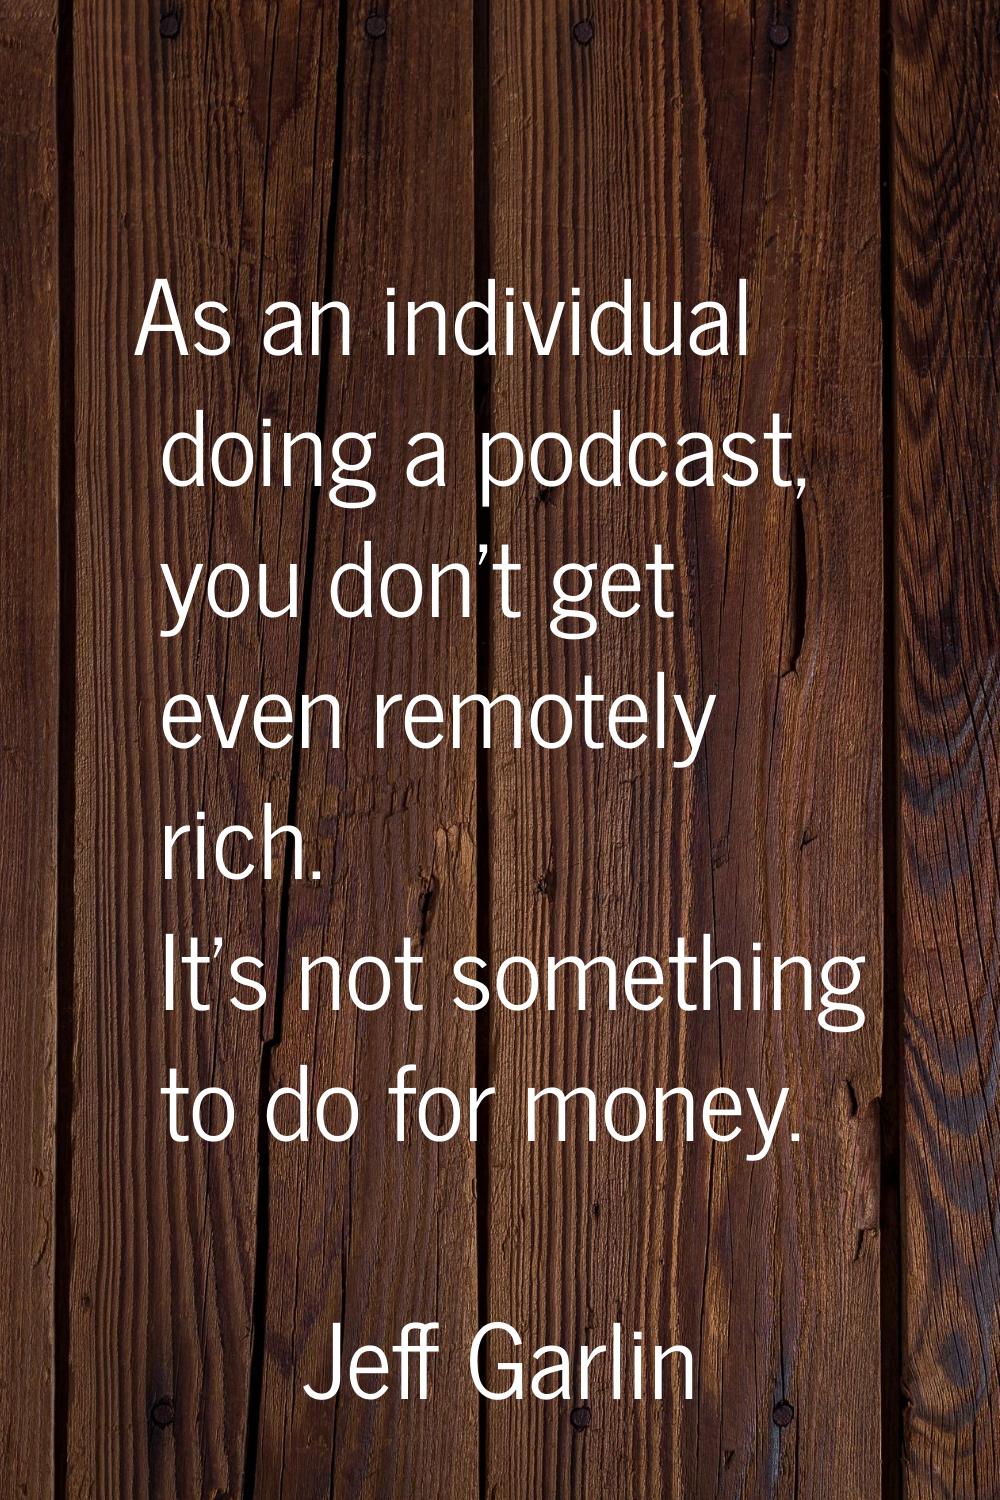 As an individual doing a podcast, you don't get even remotely rich. It's not something to do for mo